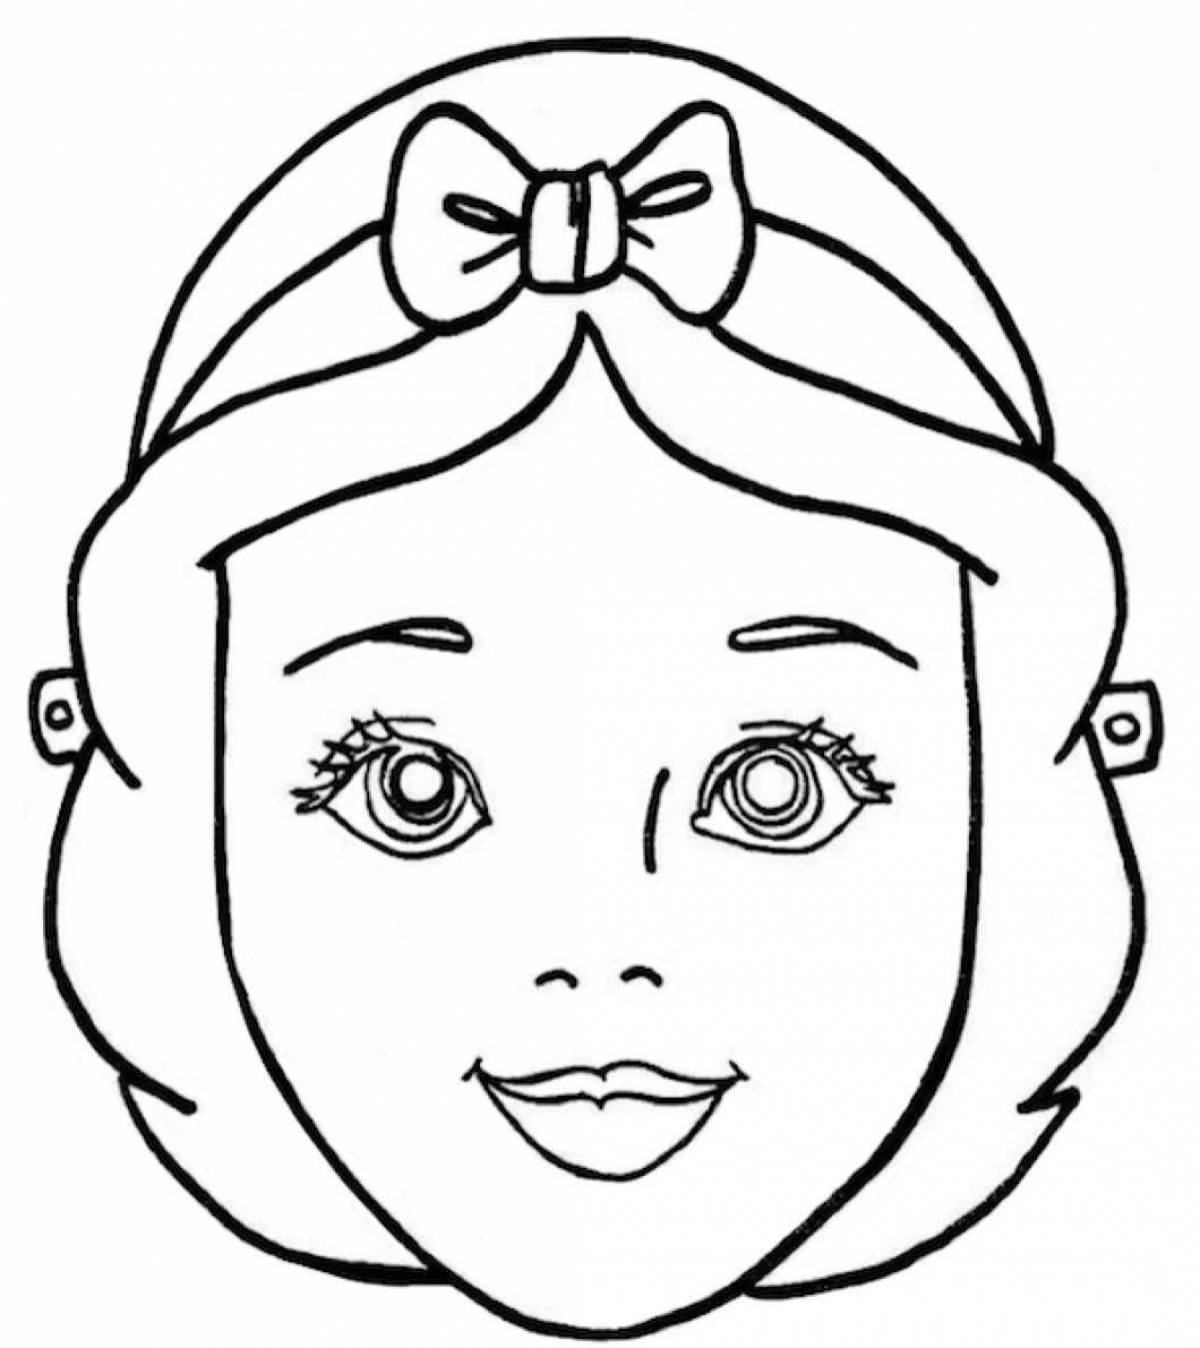 Cute baby face coloring book